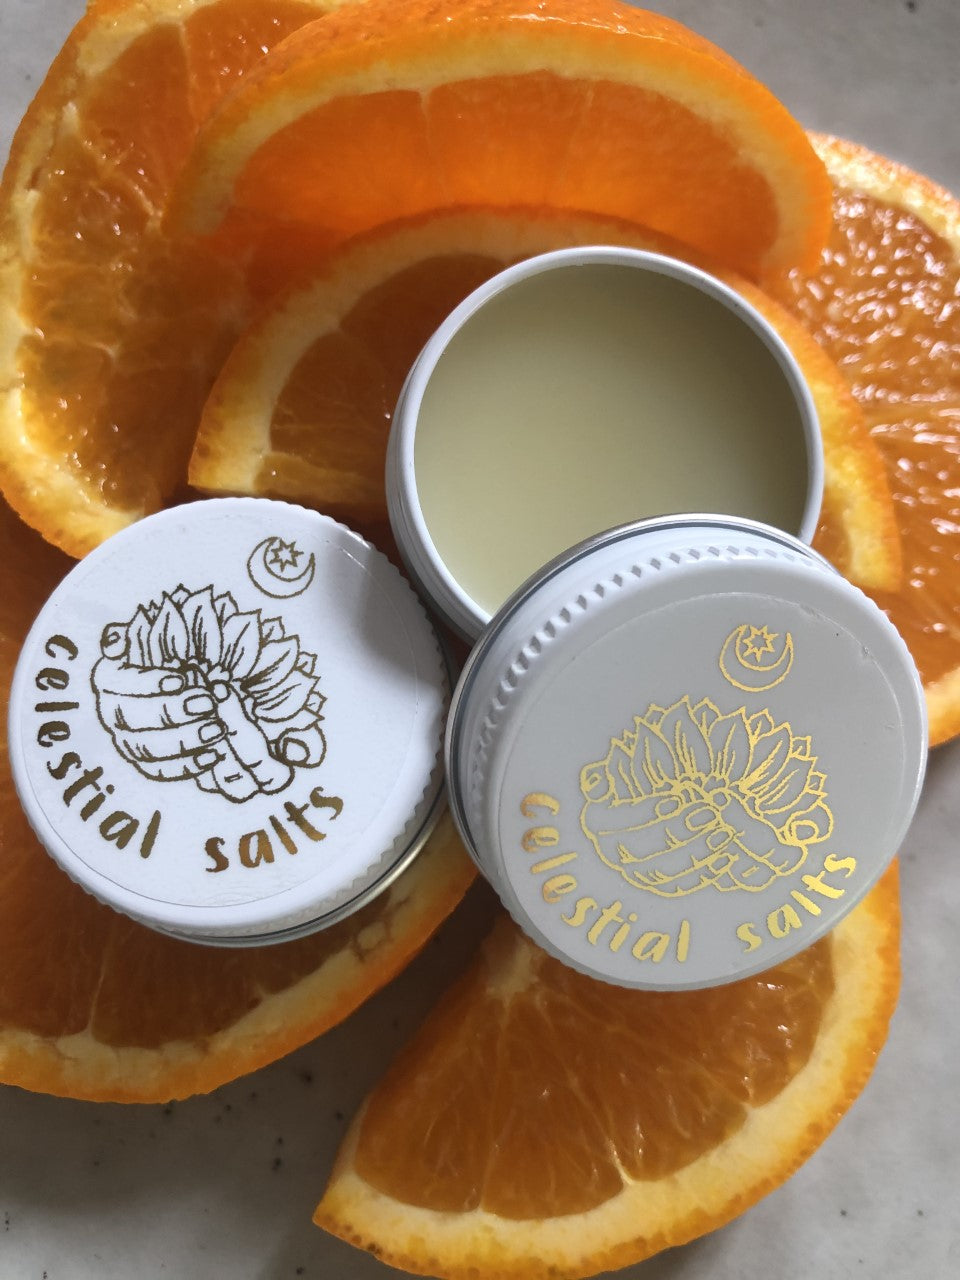 ALL NATURAL FLAVOURED LIP BALM COLLECTION